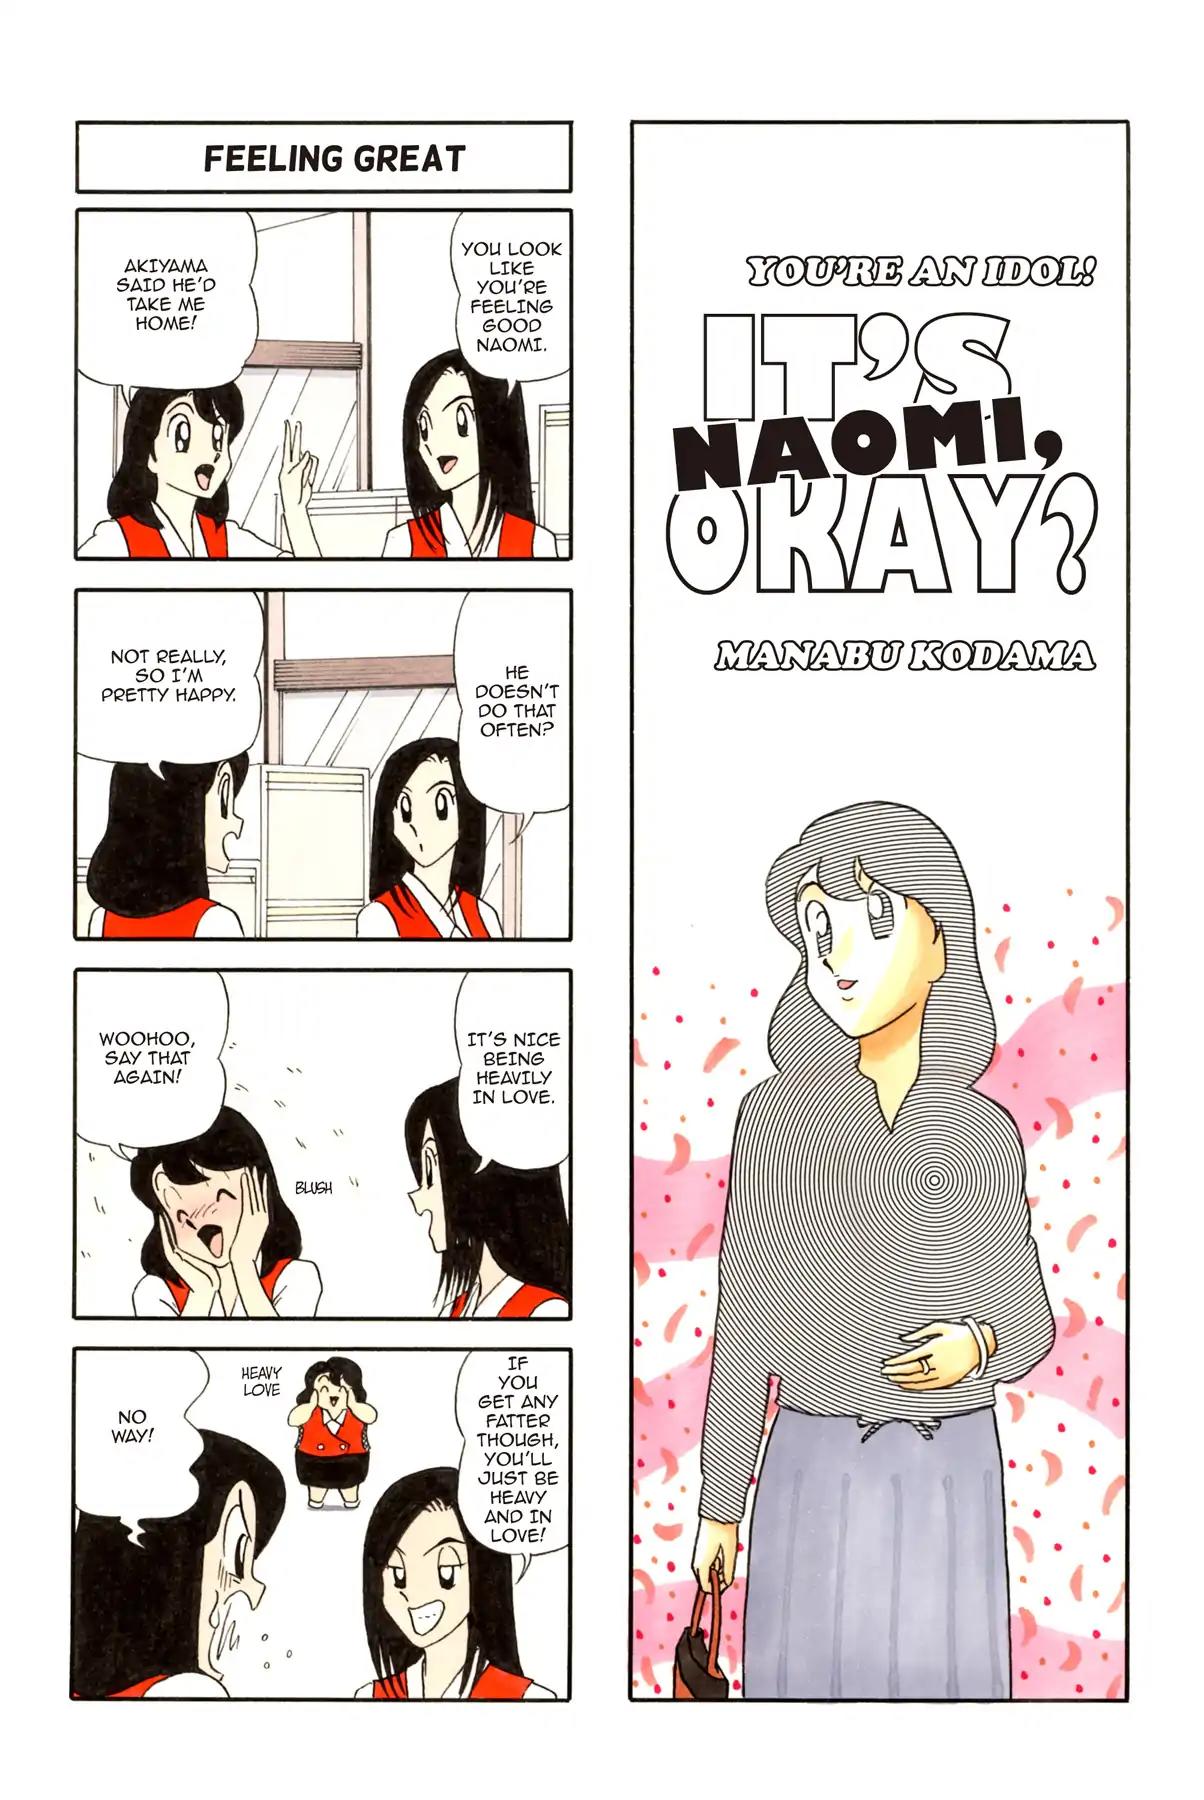 It's Naomi, Okay? After 16 Vol 1 Chapter 18